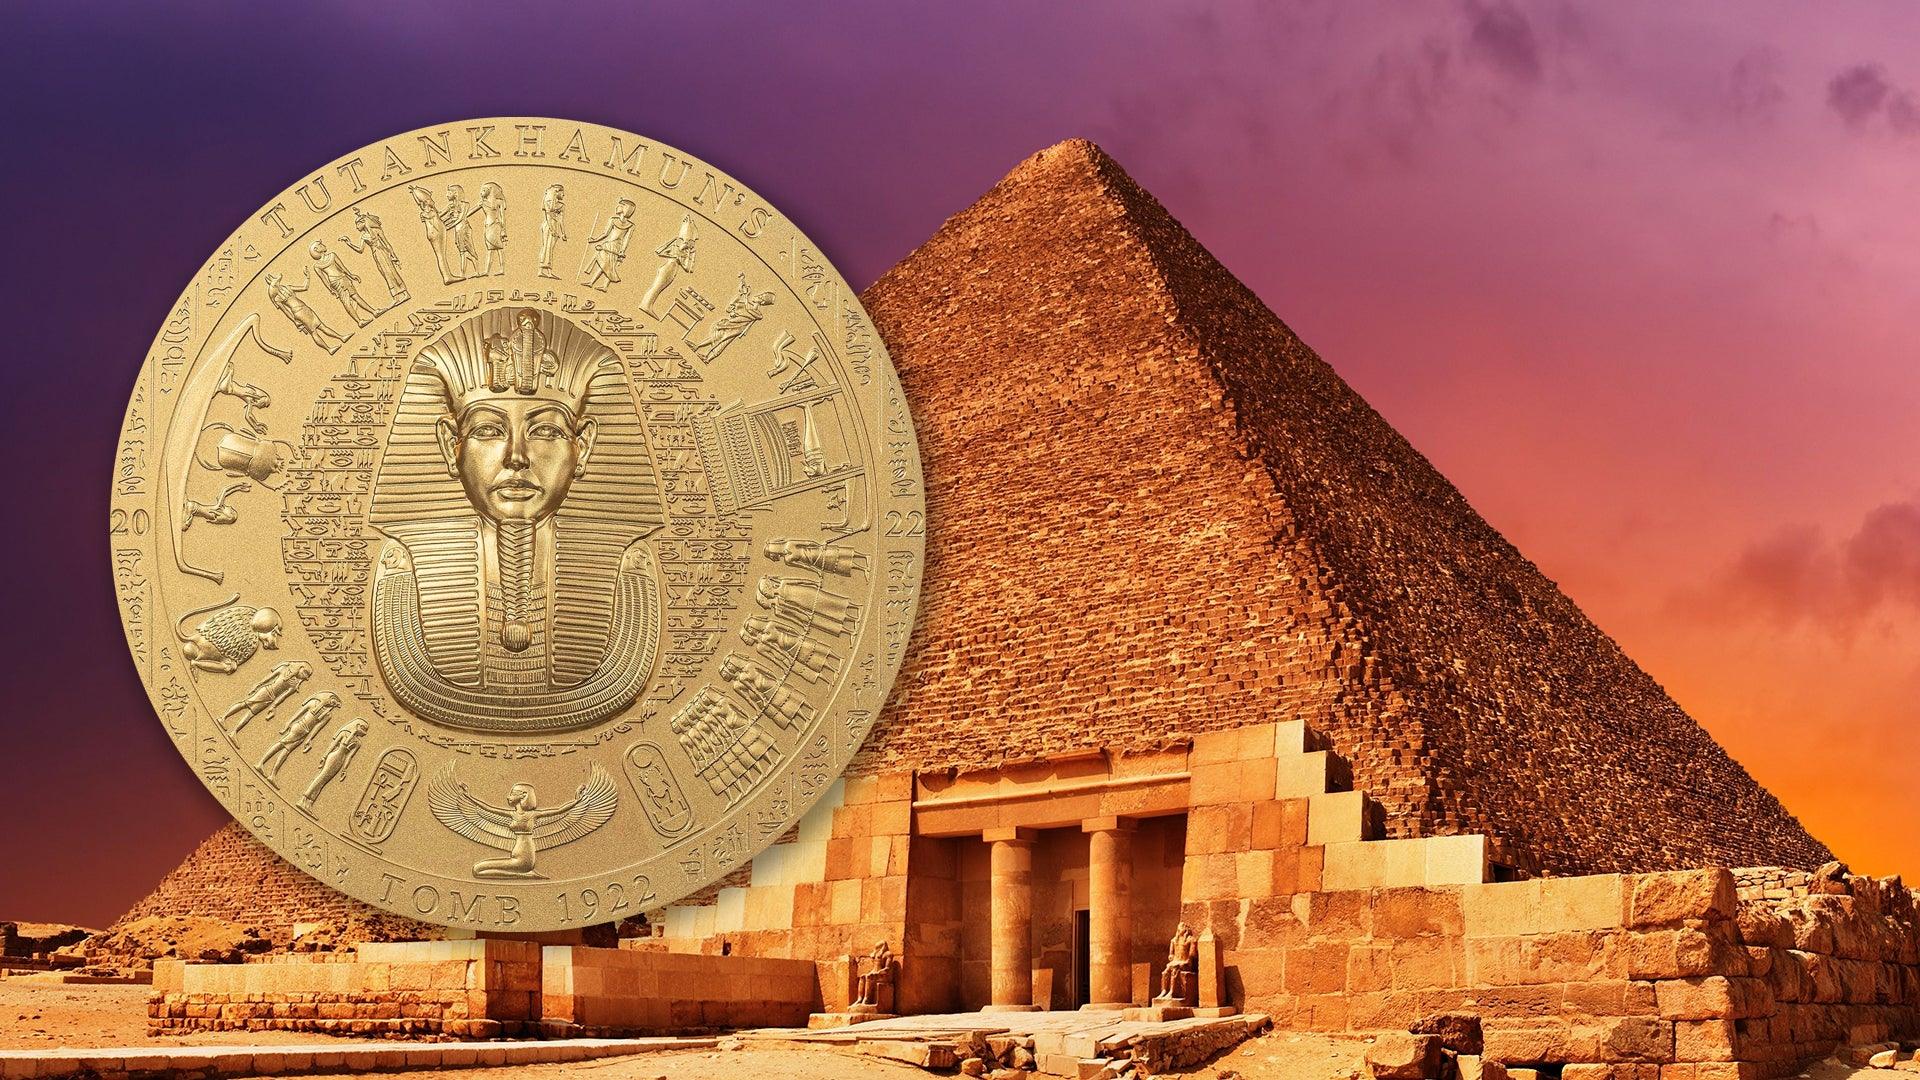 TUTANKHAMUN’S TOMB 1922 Archeology Symbolism Gilded 3 Oz Silver Coin 20$ Cook Islands 2022 - PARTHAVA COIN